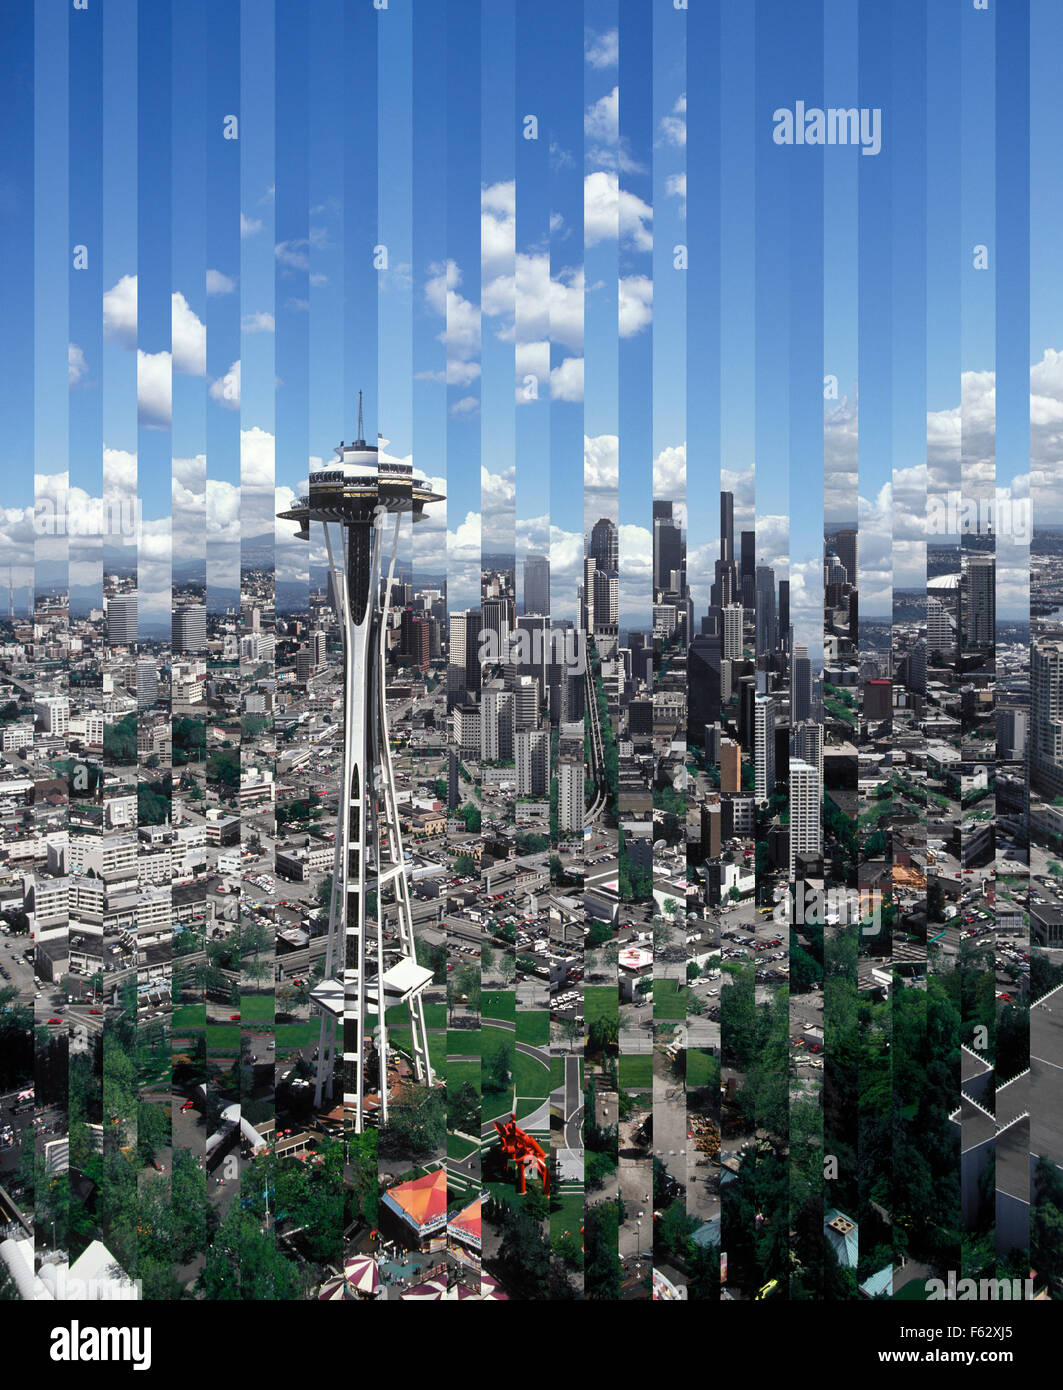 Washington, Seattle, City and Space Needle Viewed Through Distorted Glass Stock Photo